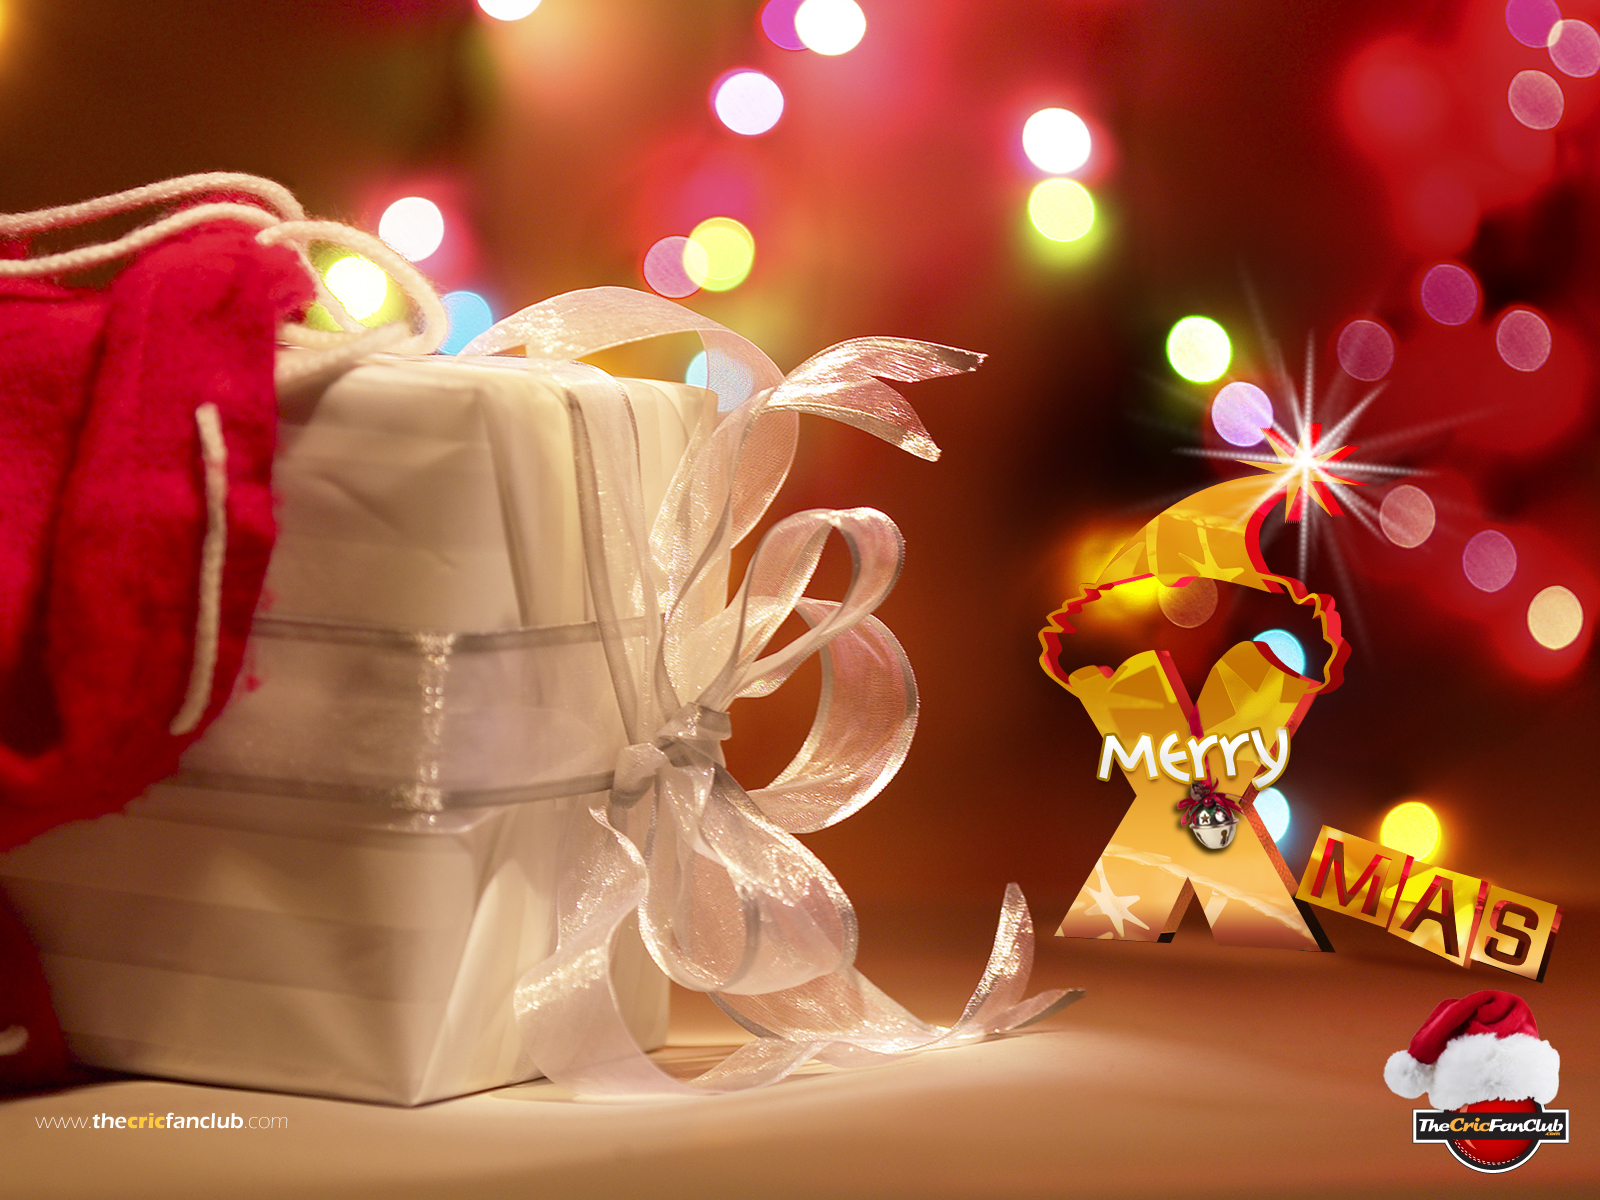 Download HQ Merry Christmas wallpaper / People / 1600x1200